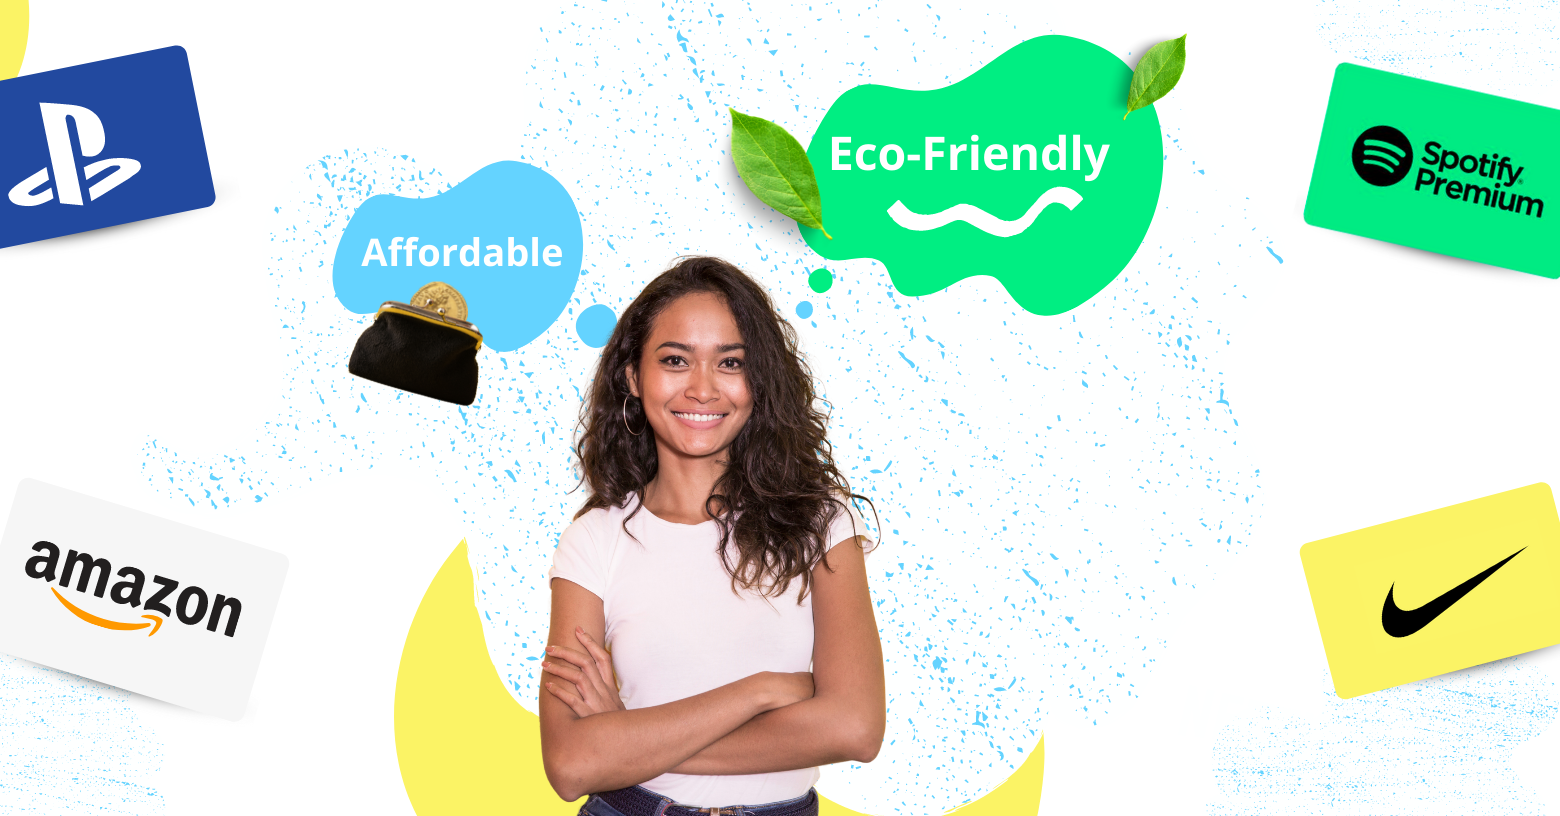 Girl with folded arms, smiling with affordable and ecofriendly benefits of egift to reward employees